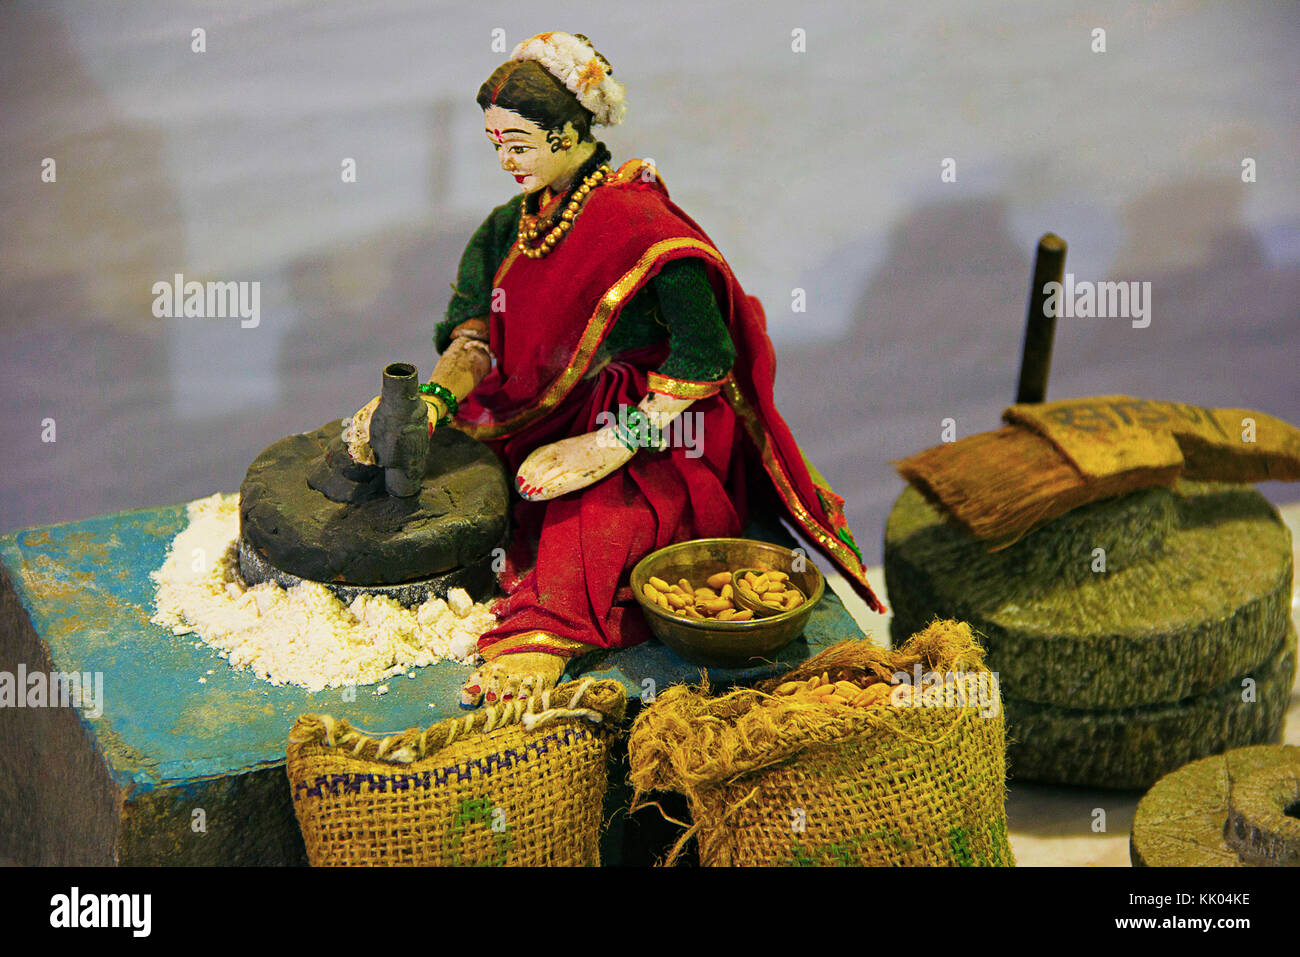 Sculpture of traditional Maharashtrian woman grinding wheat grains Stock Photo